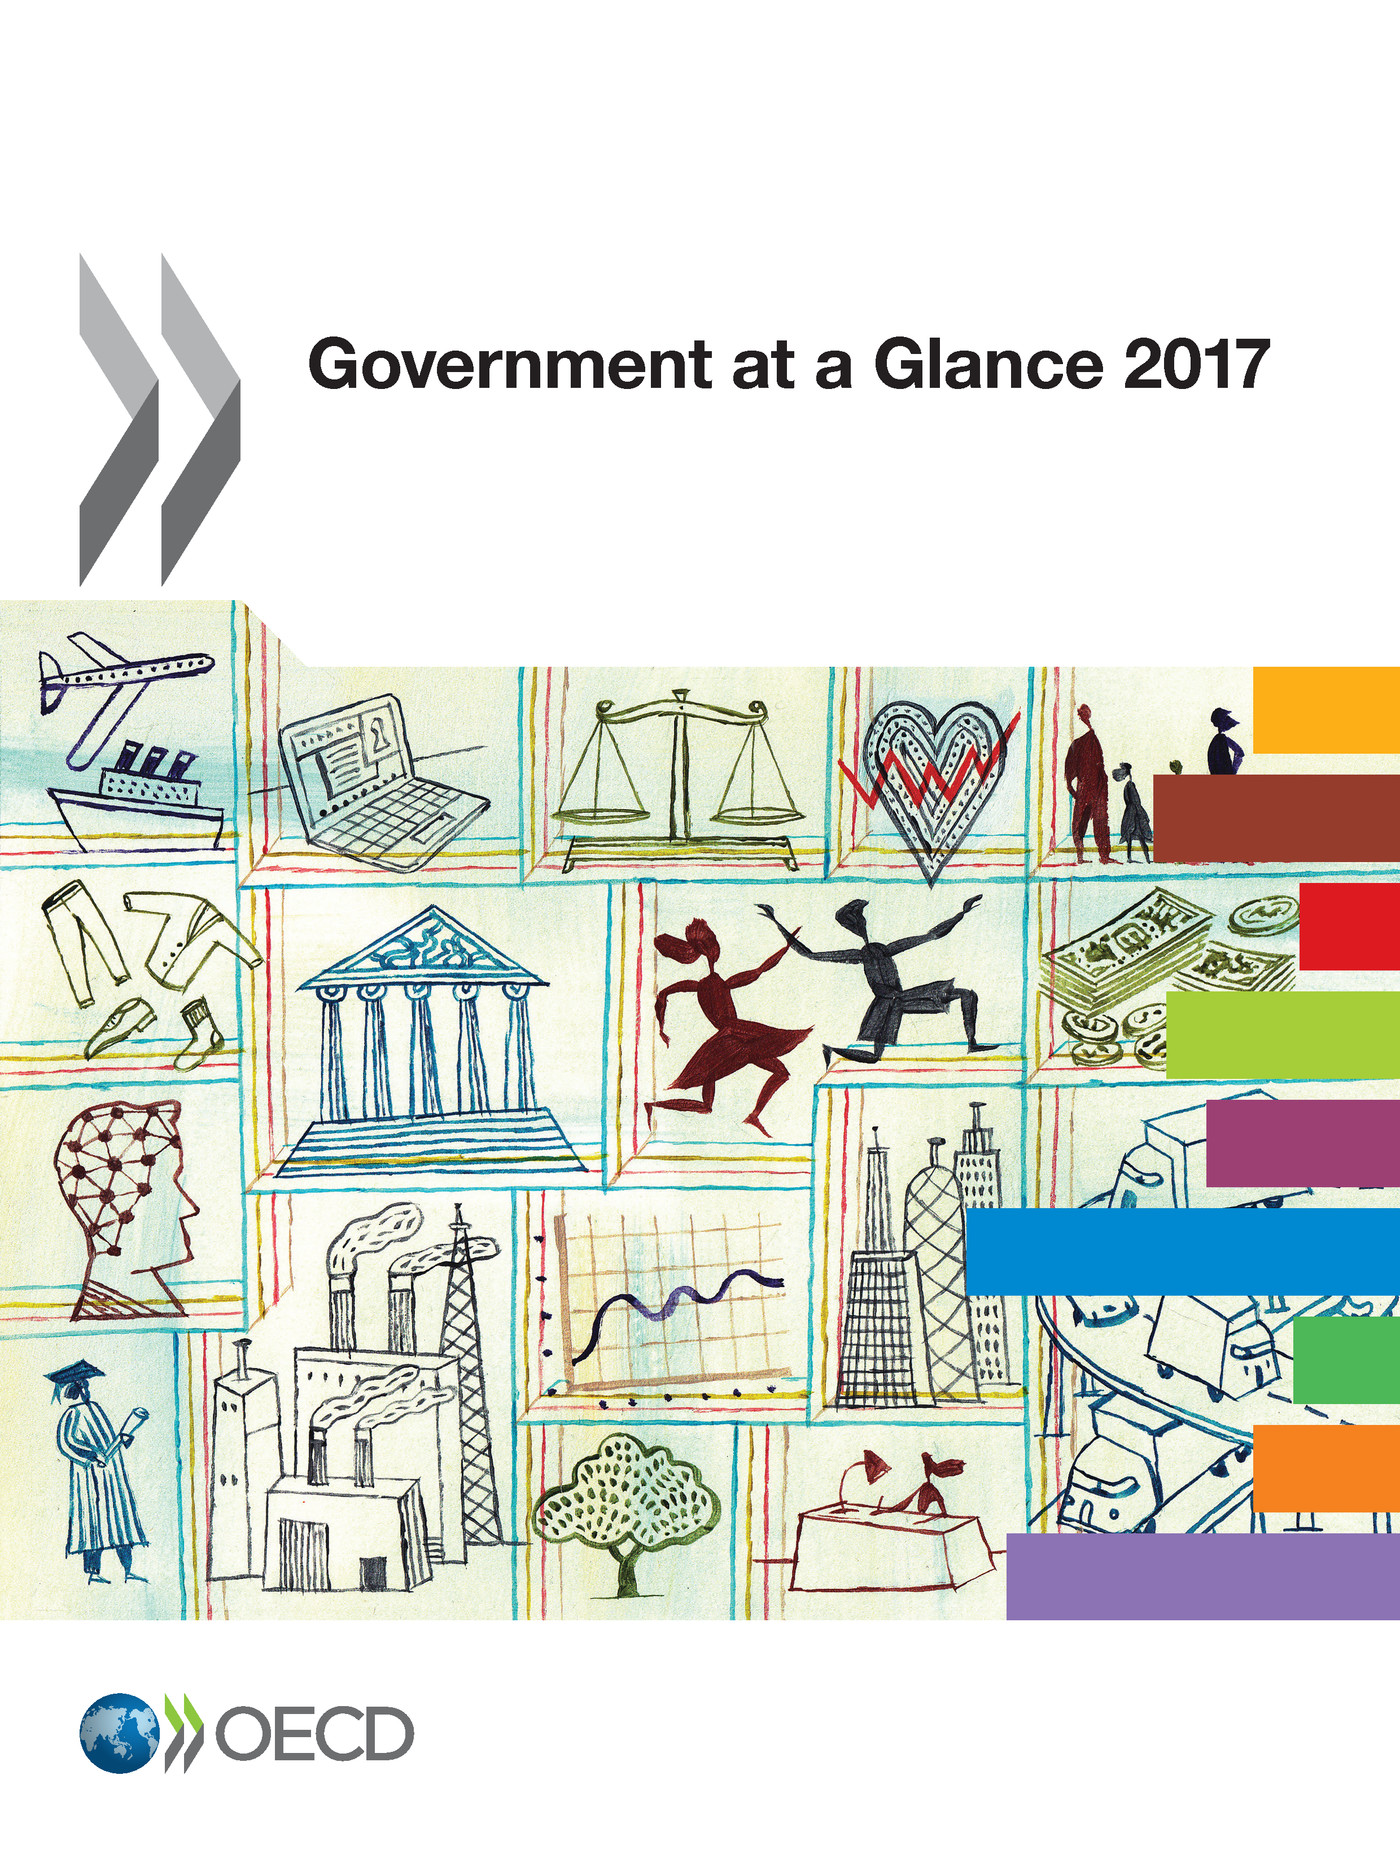 Government at a Glance 2017 -  Collectif - OCDE / OECD